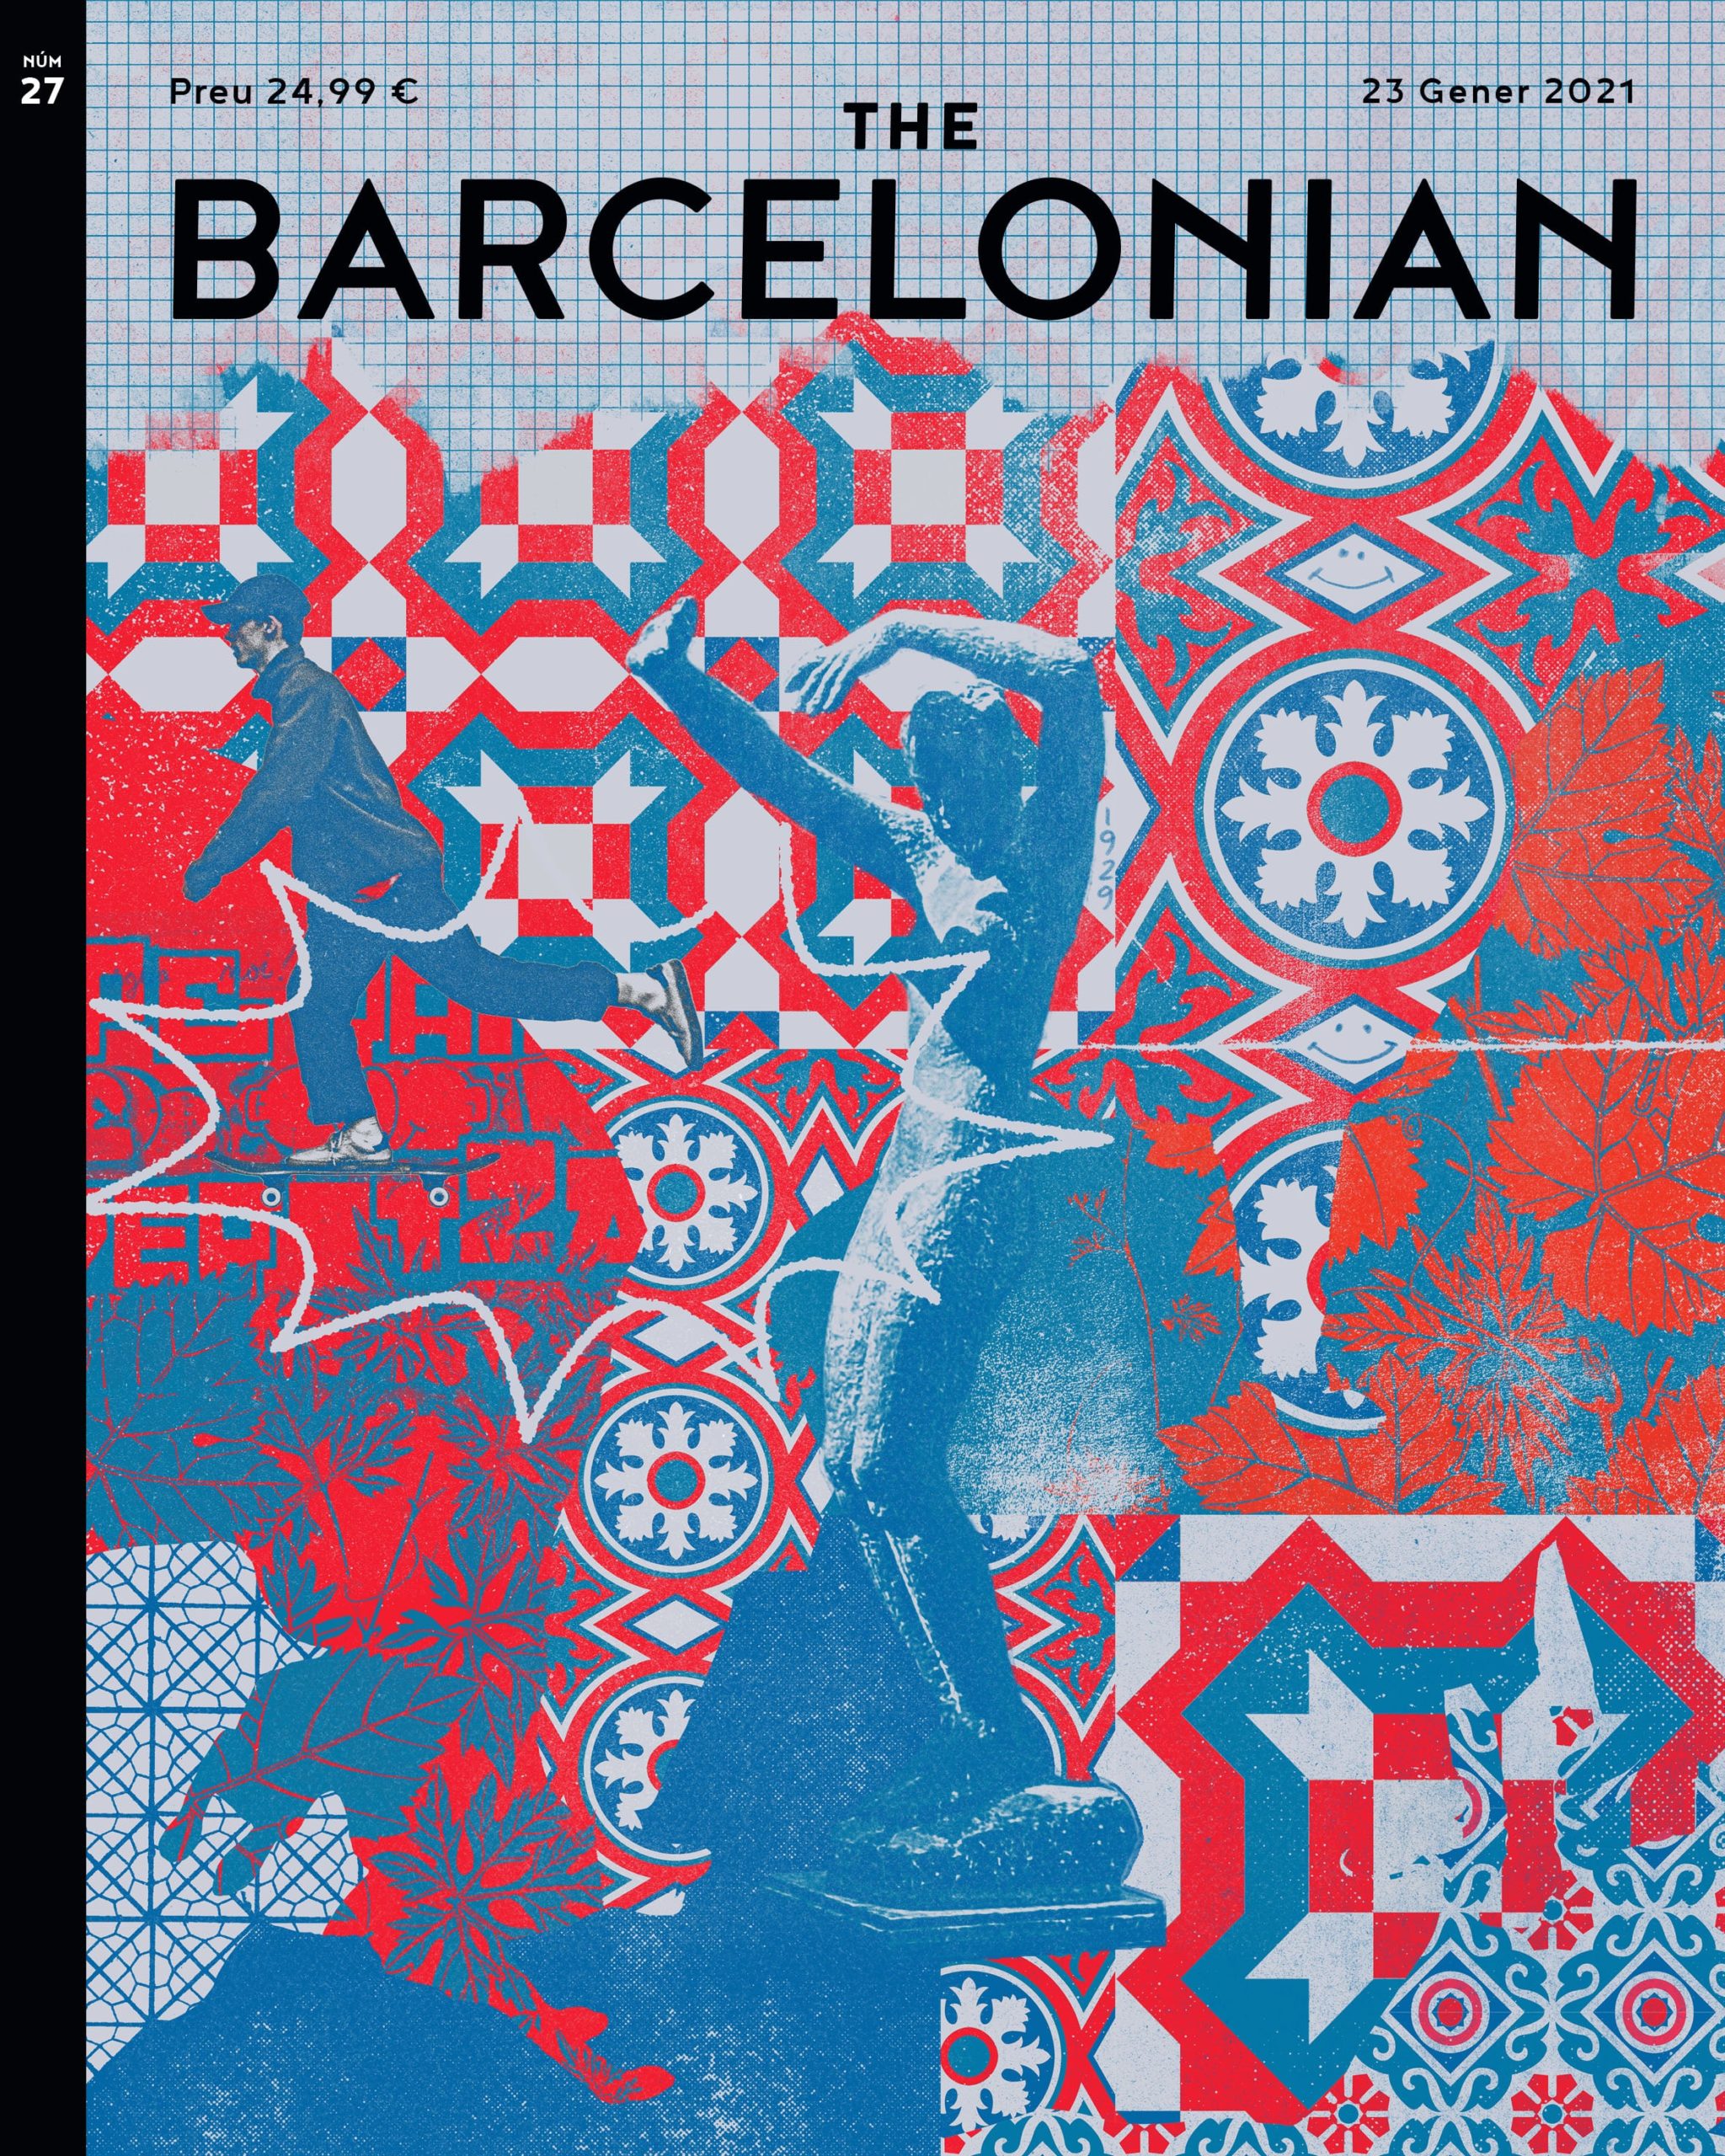 The Barcelonian cover